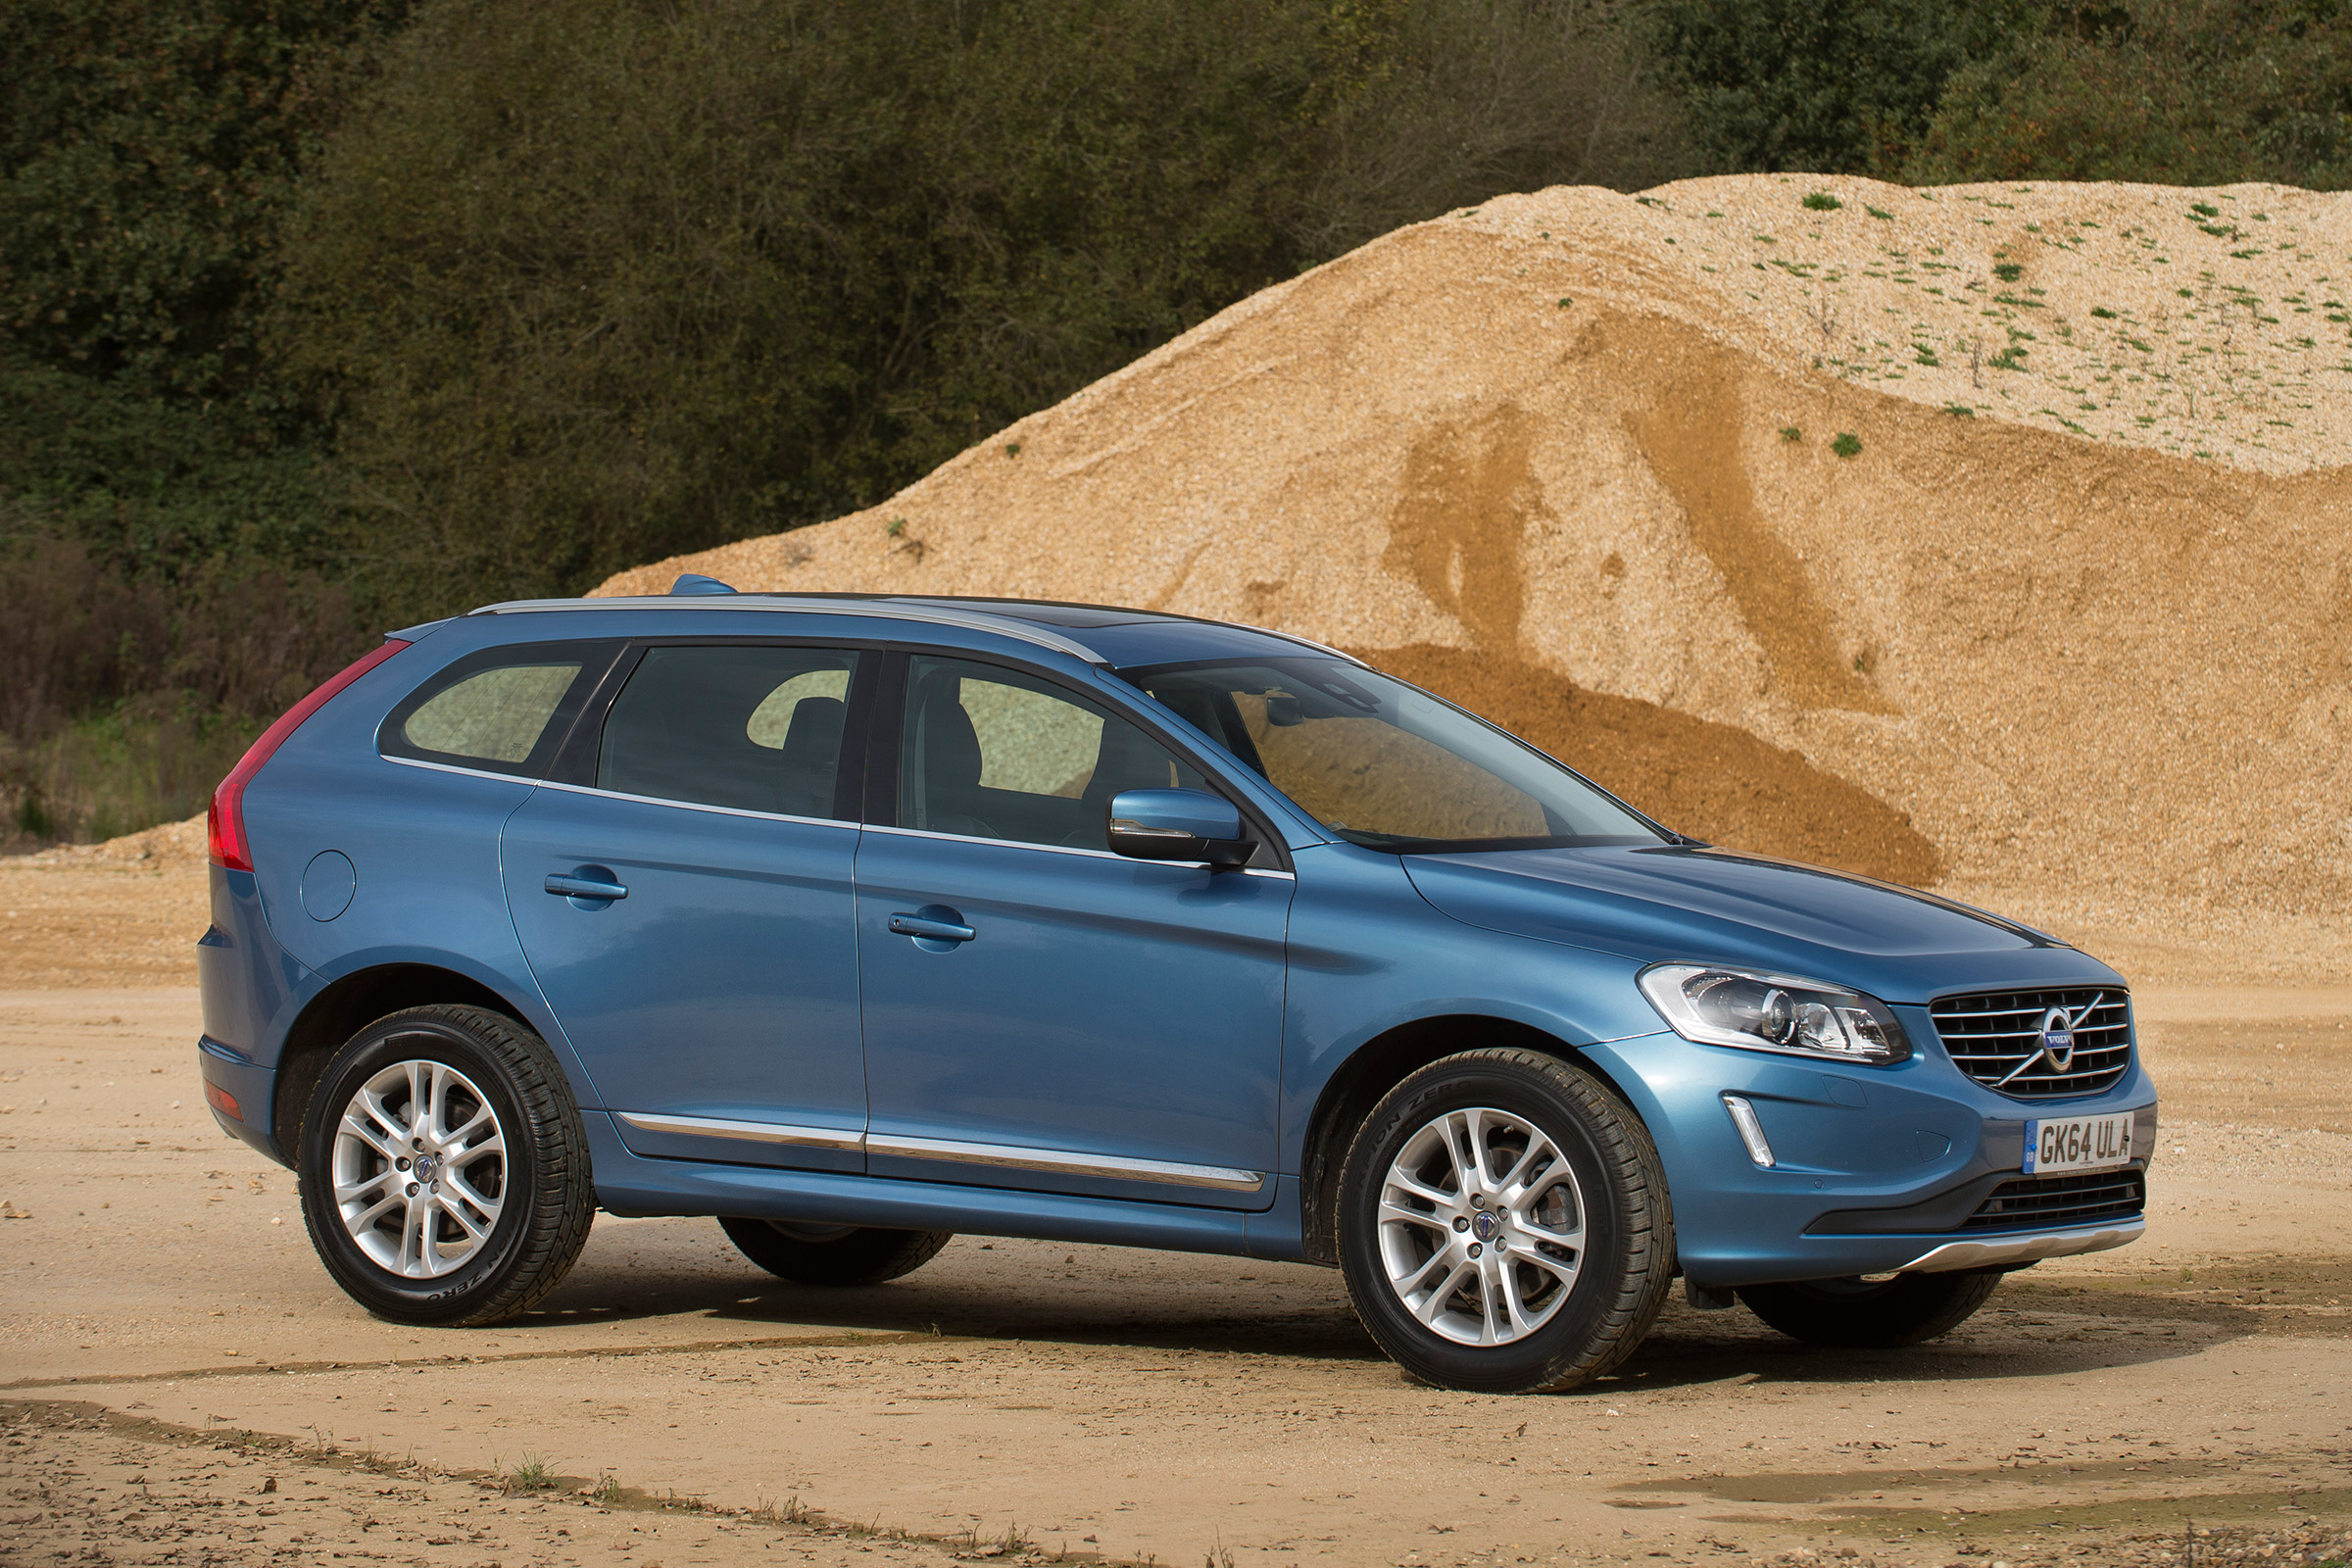 Used Volvo XC60 review | Auto Express